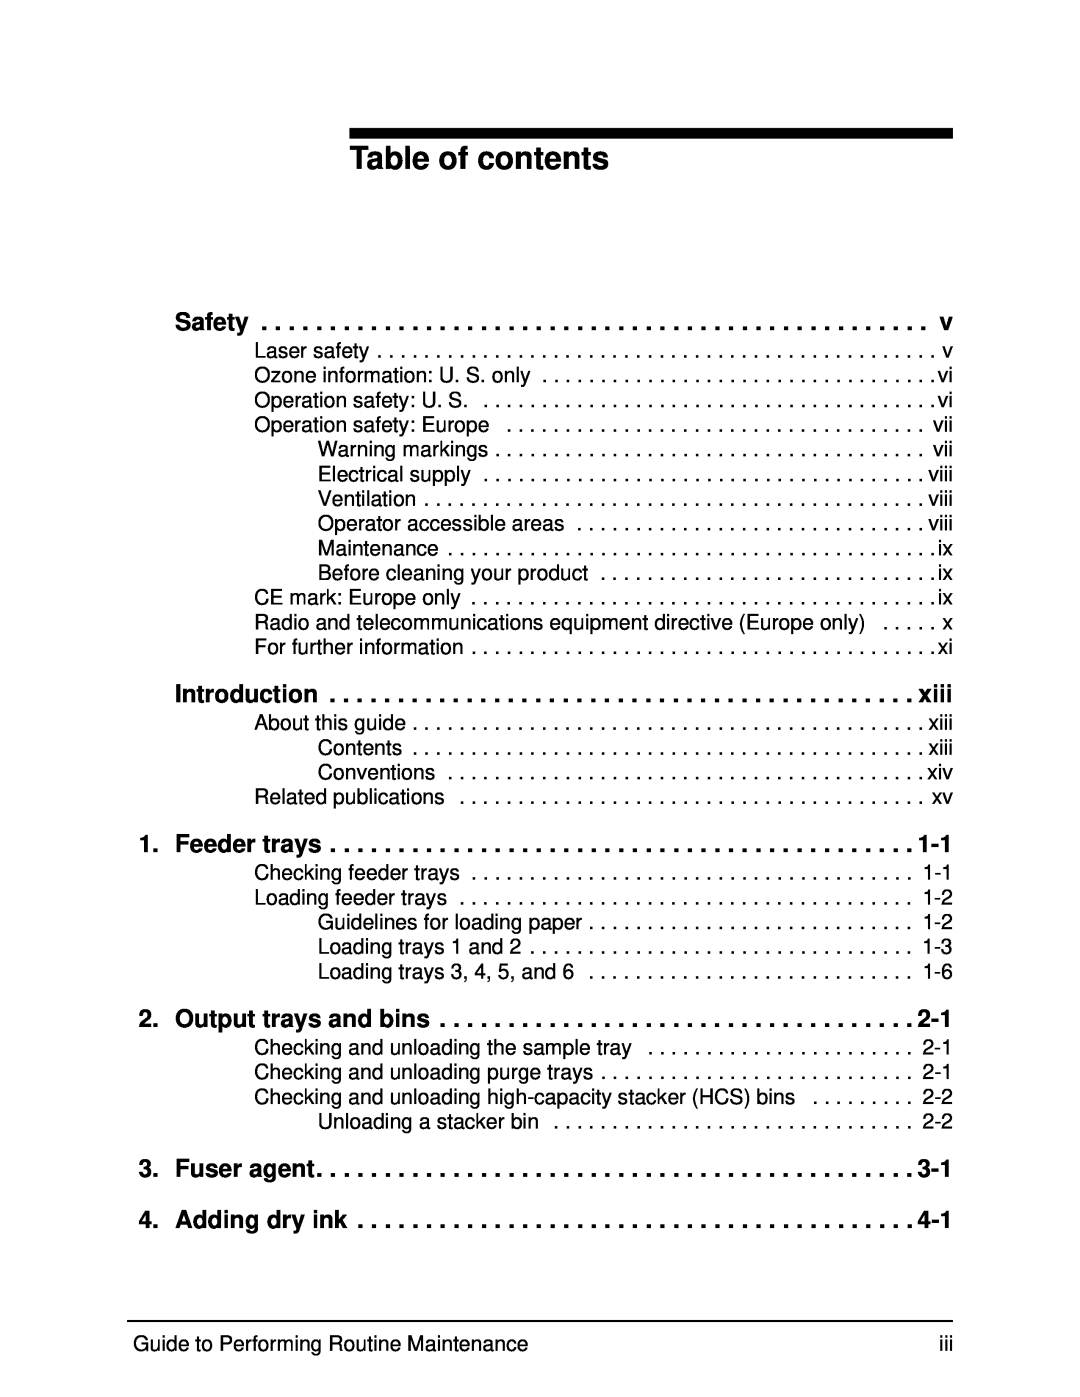 Xerox DocuPrint 96 manual Table of contents, Safety, Introduction, Feeder trays, Output trays and bins 